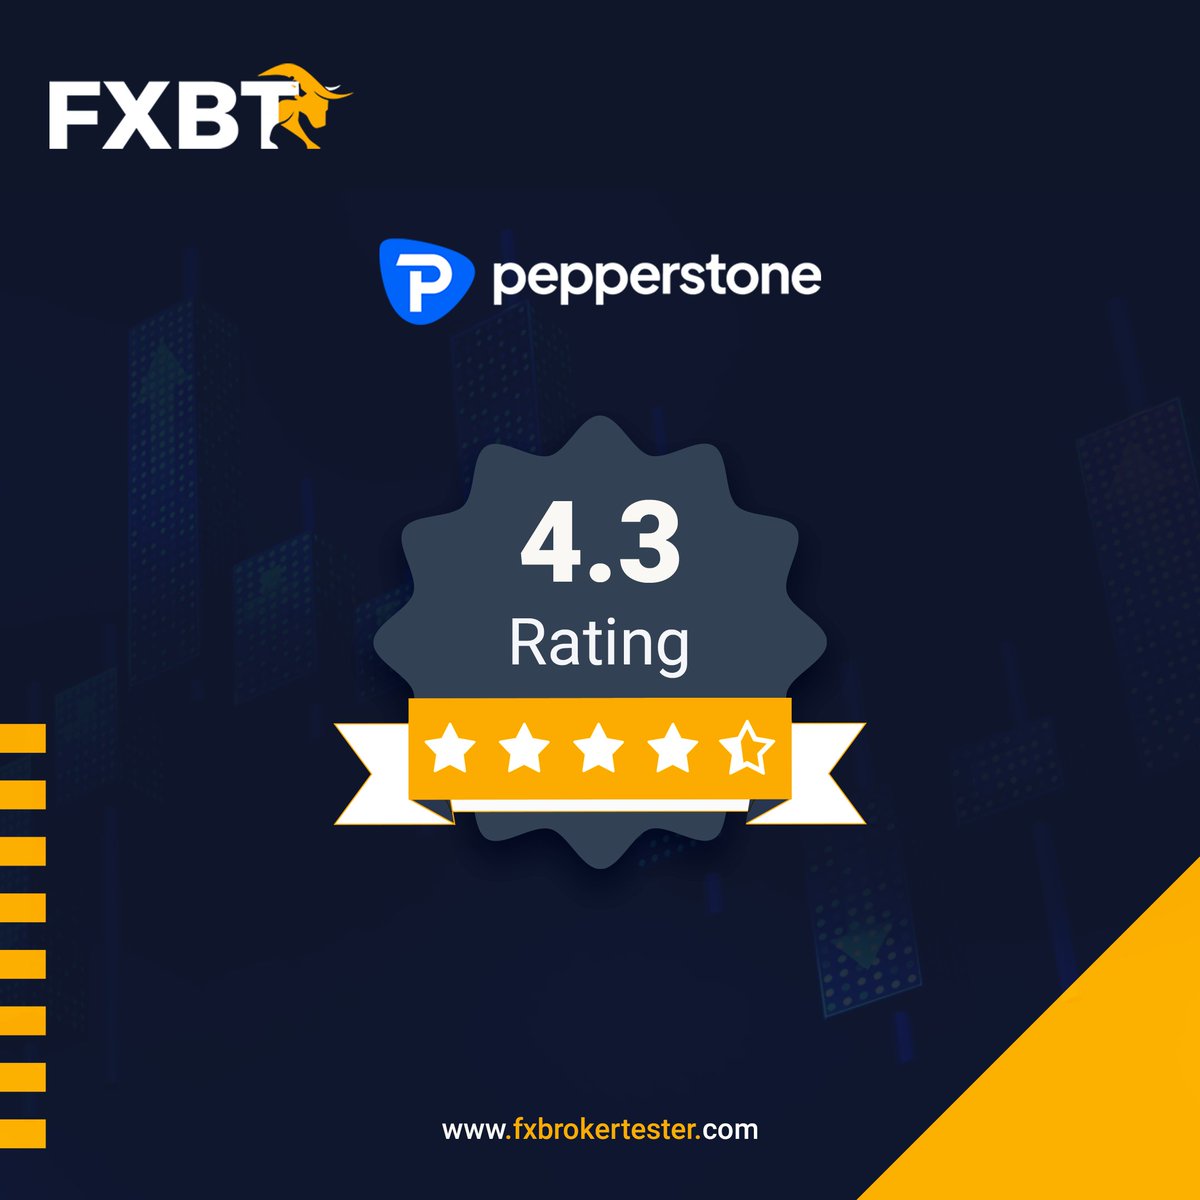 Pepperstone: Where Excellence Meets Innovation 🌟⚙️ Rated a stellar 4.3 on FXBT, Pepperstone leads the way in trading innovation and reliability. Join the community of traders who trust Pepperstone.

#Pepperstone #InnovationInTrading #NavigateWithConfidence